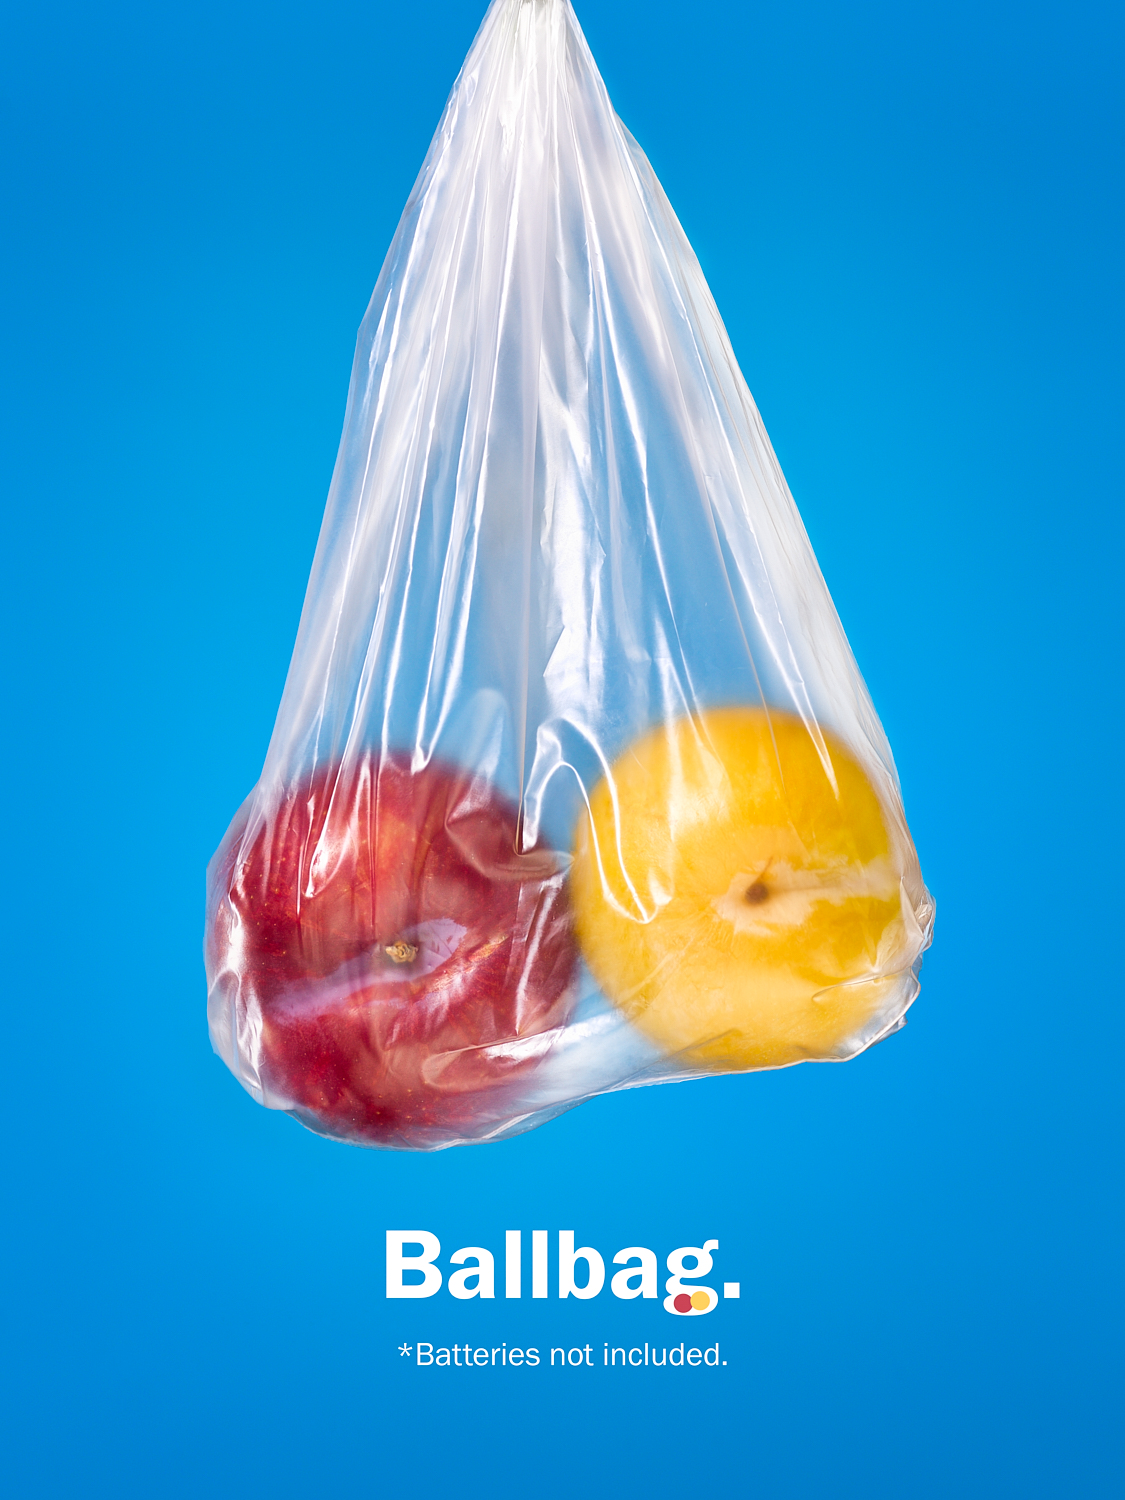 A photograph by Joey Rolph, depicting a plastic bag containing two plums, resembling a "ballbag".